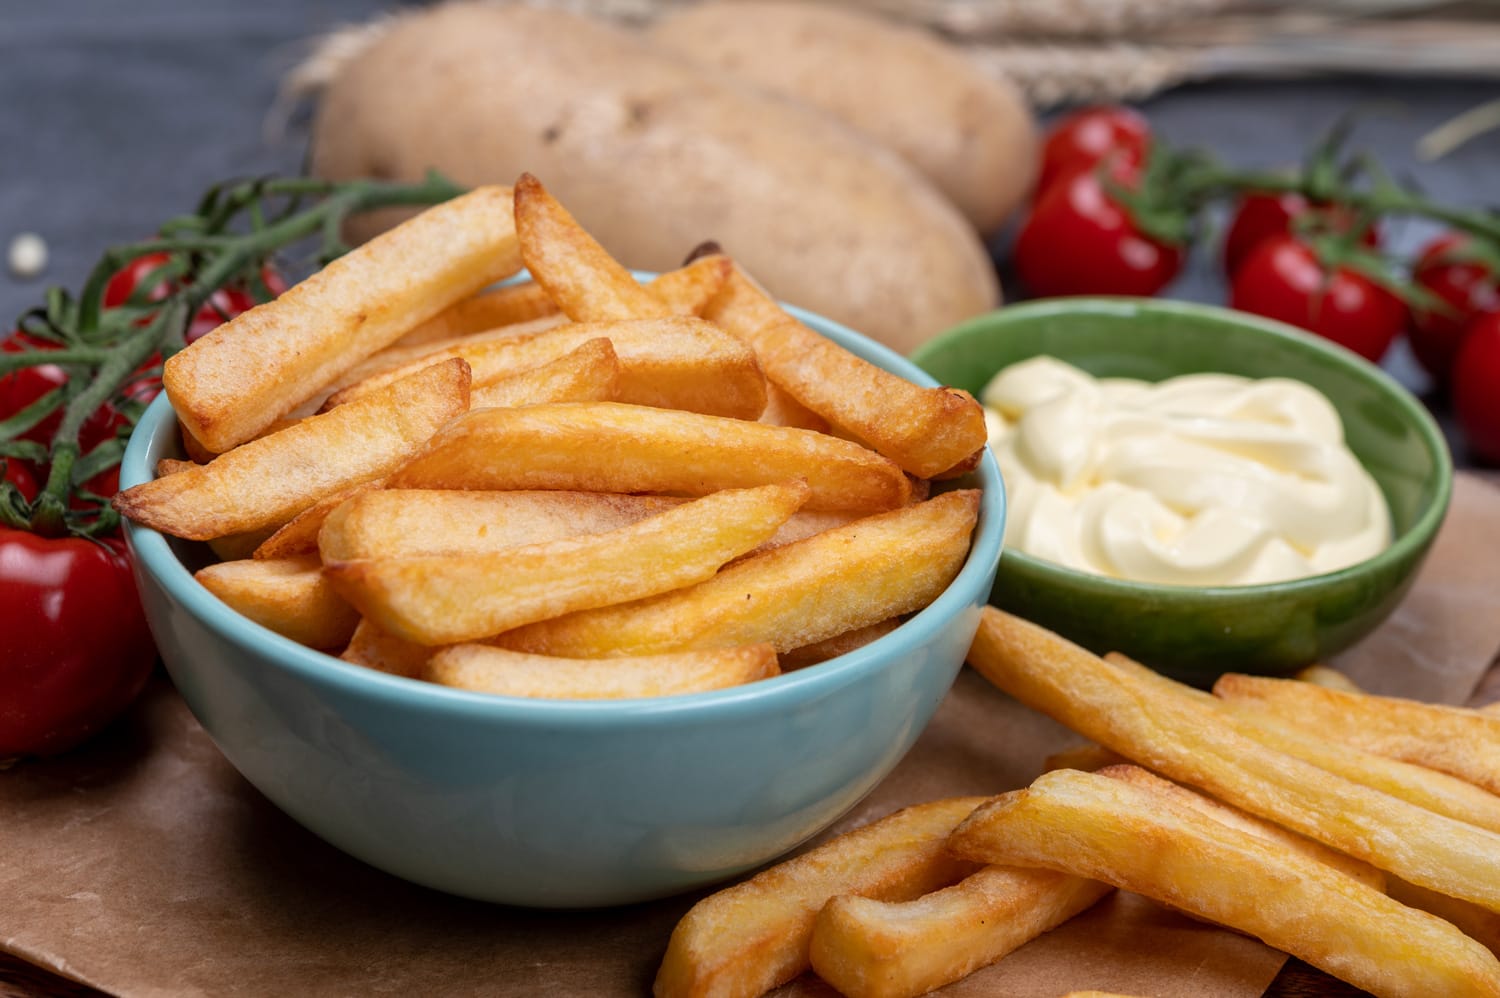 Bown with fresh cooked french fries potato chips with belgian mayonnaise sauce close up